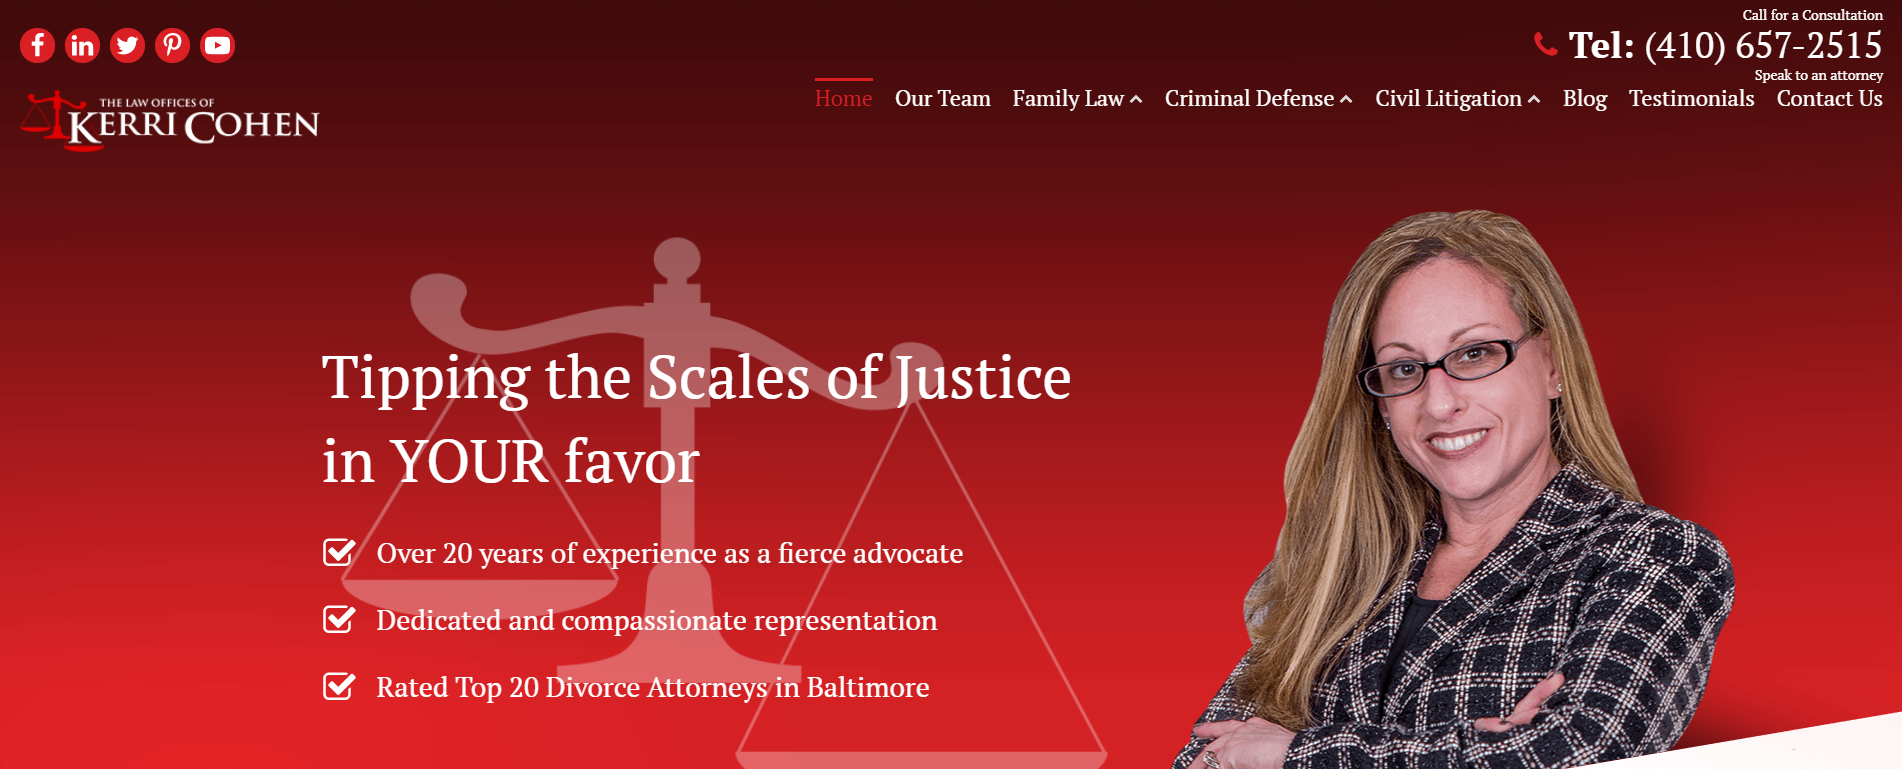 Law Office of Hasson D. Barnes, LLC - Baltimore Divorce Lawyer